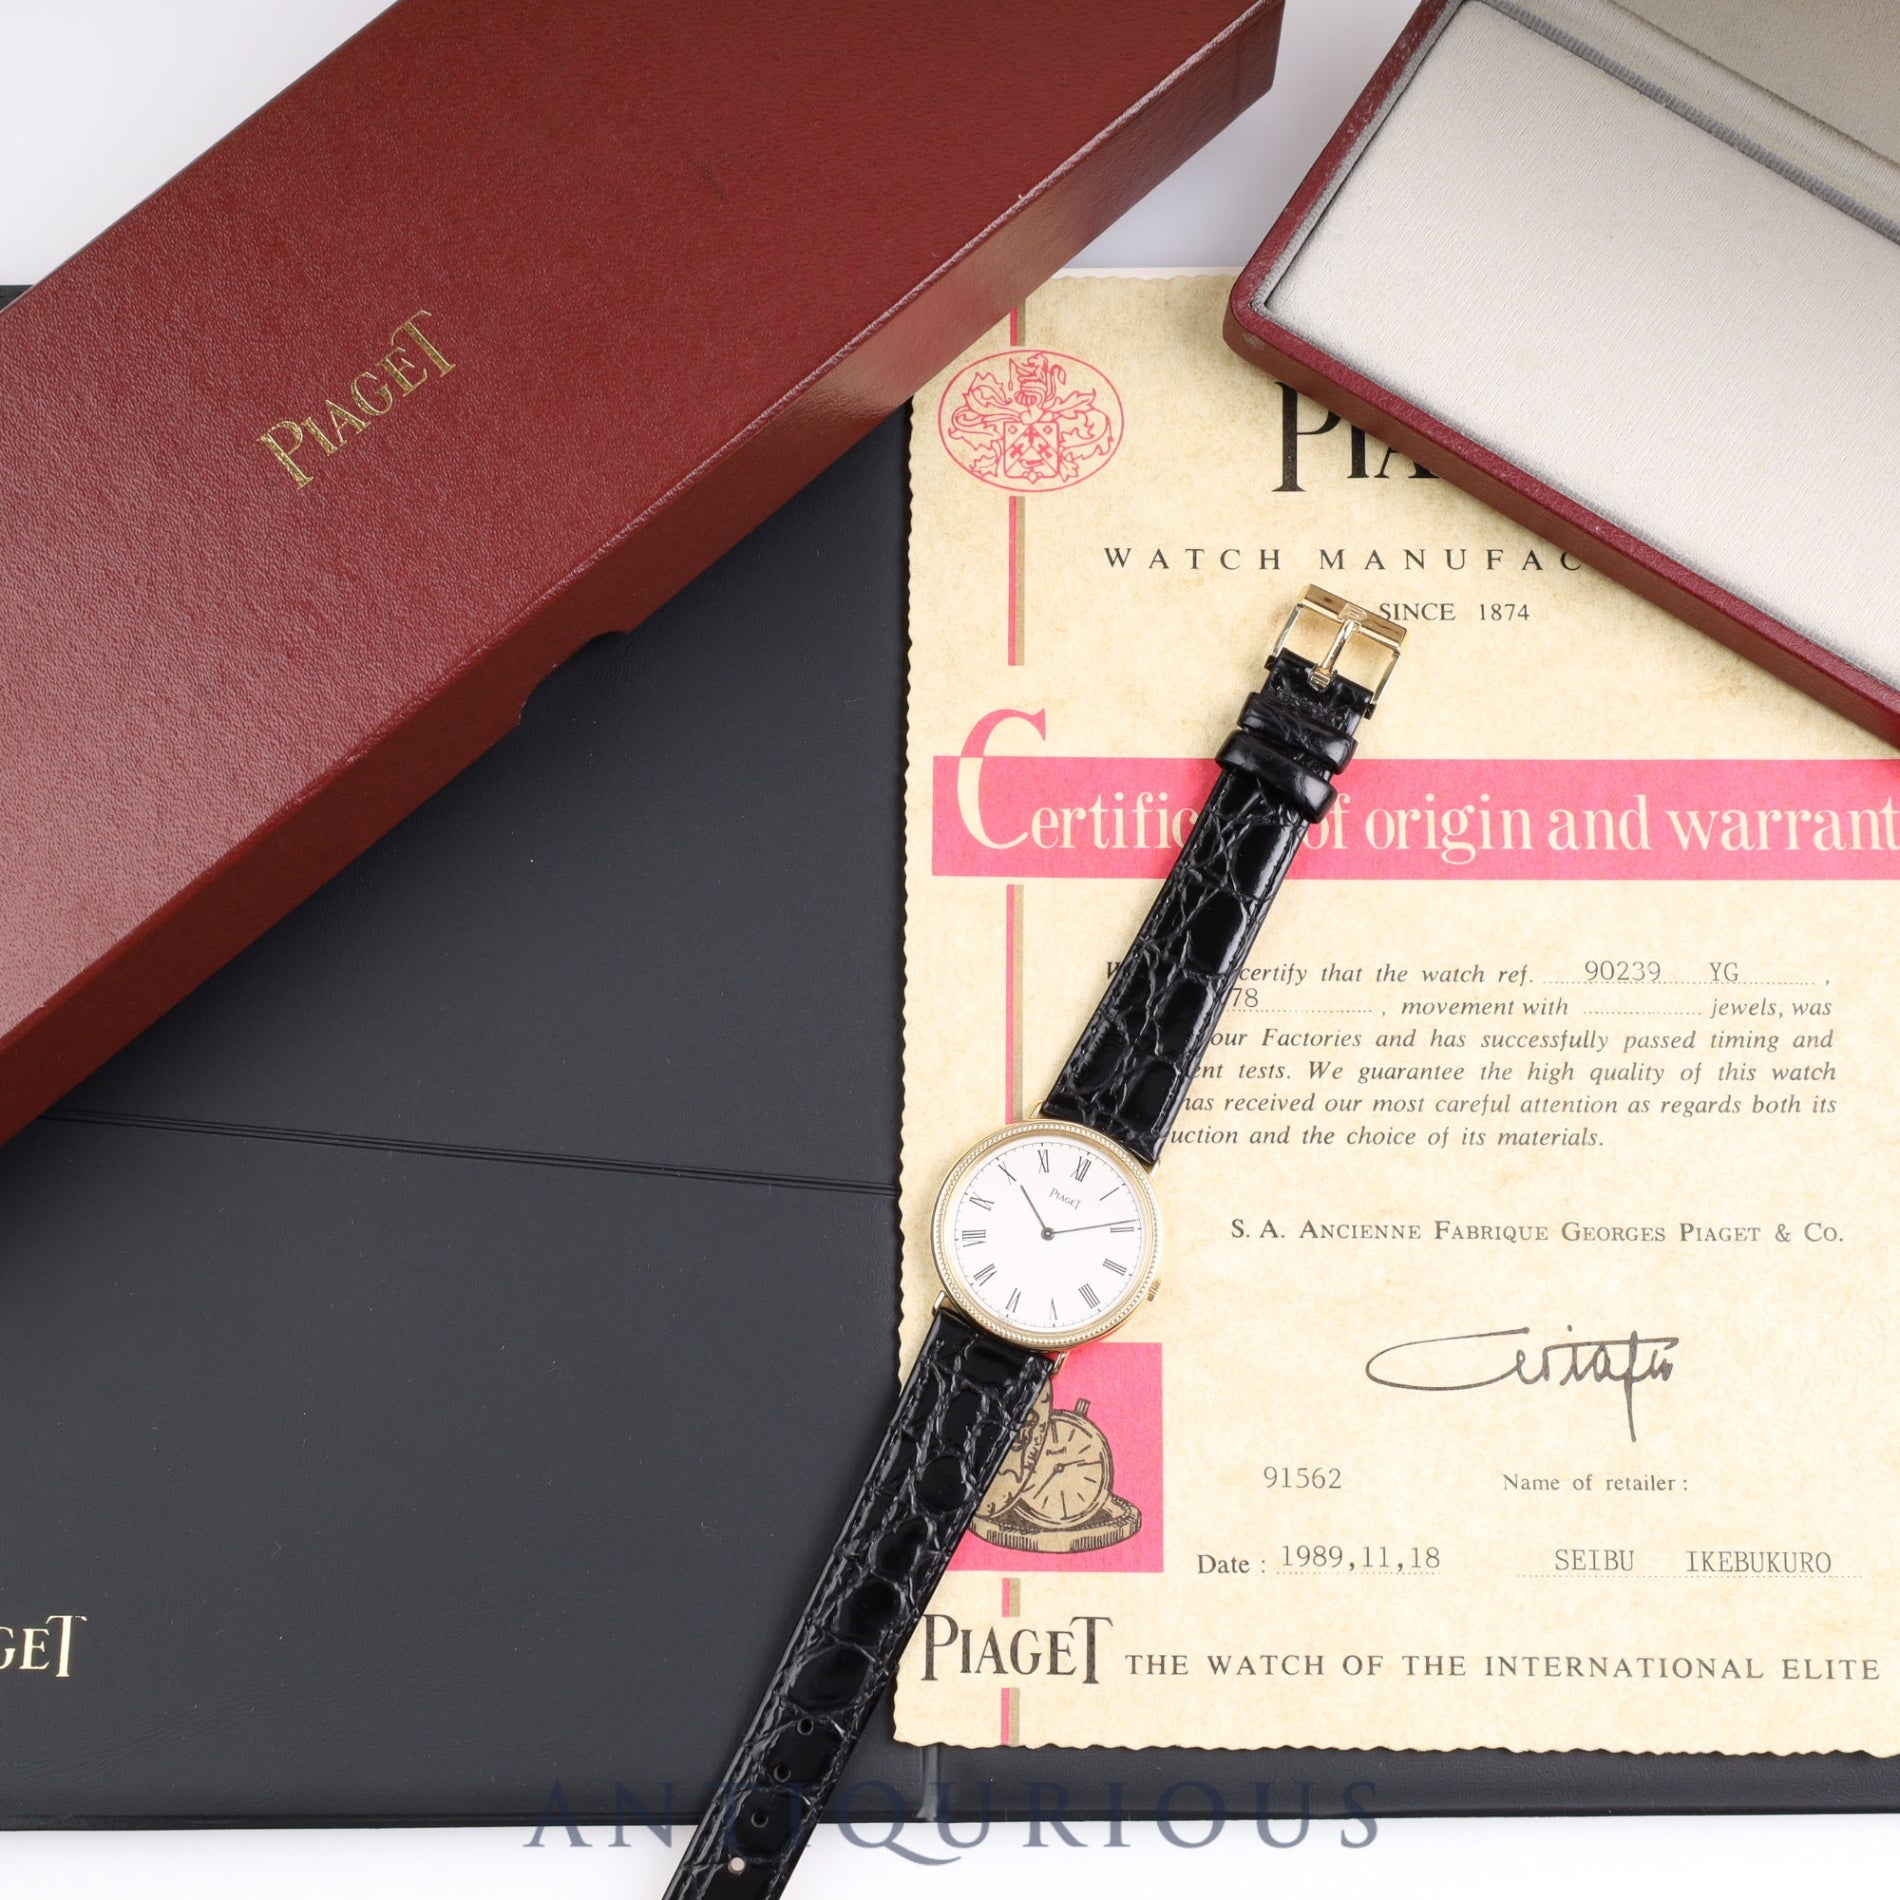 PIAGET ROUND 90239 Manual winding Cal.9P2 YG Leather Genuine buckle (750) White dial Box Warranty (1989)